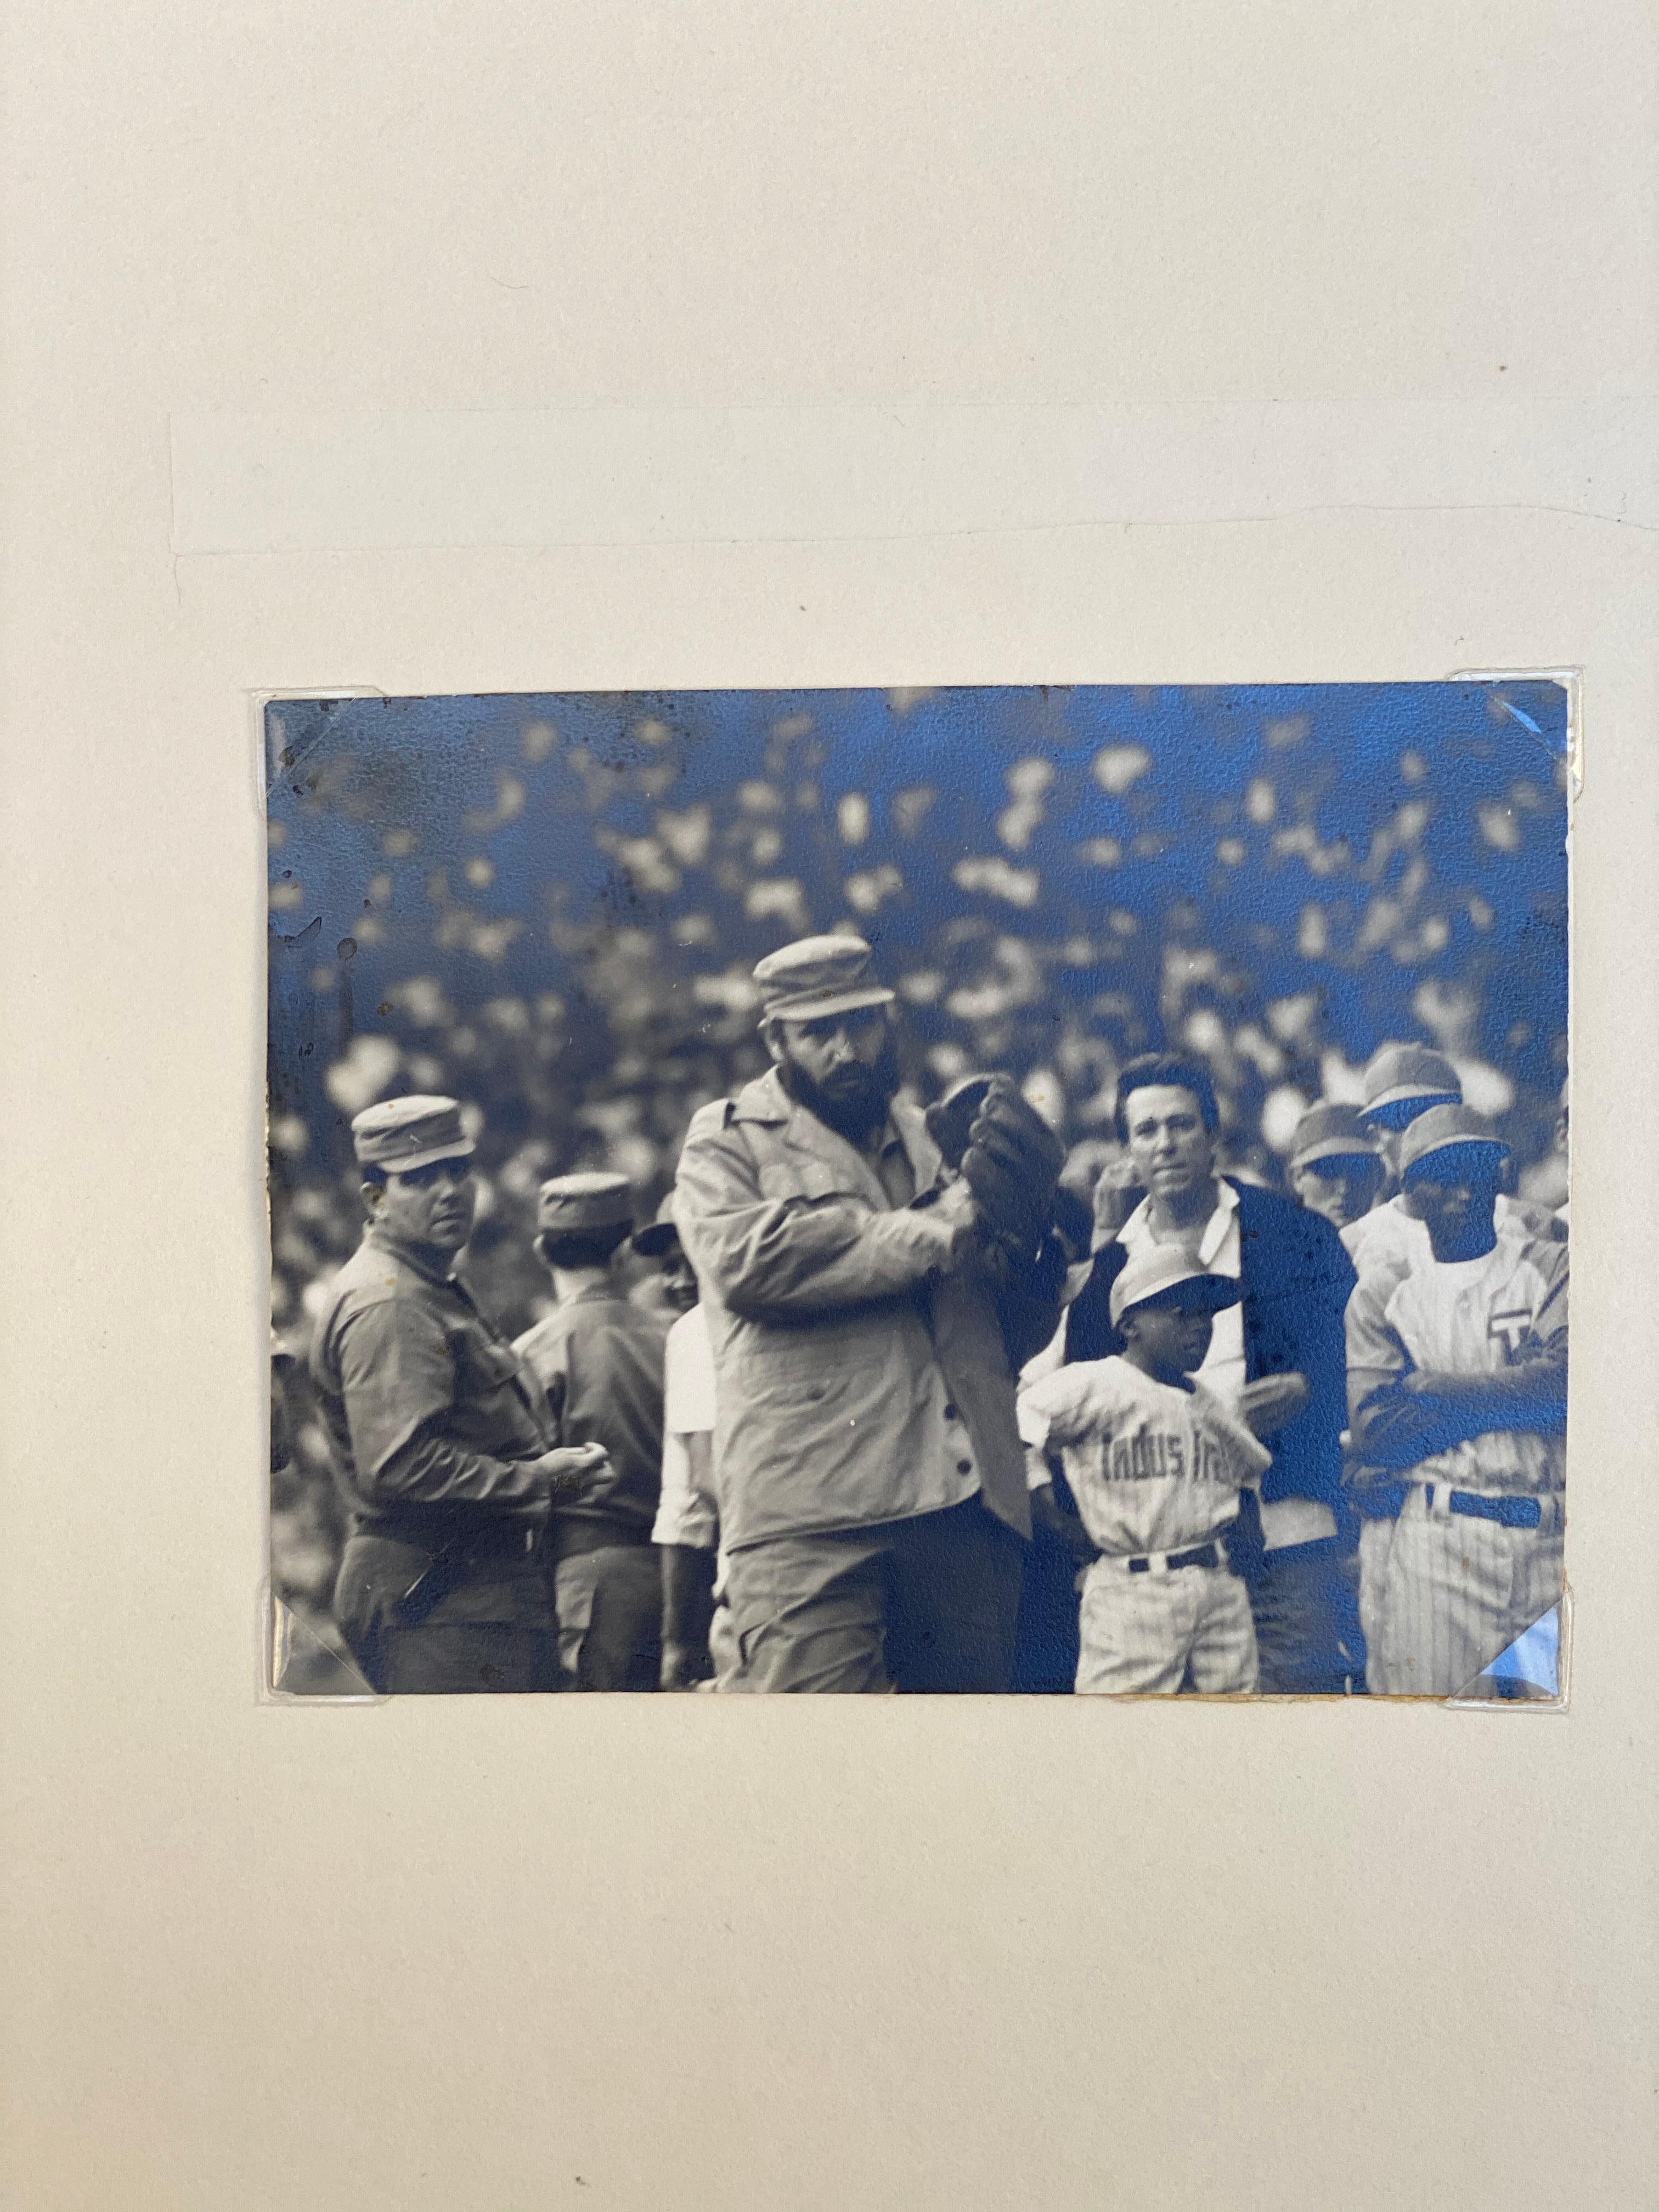 Alberto Korda
Fidel Castro playing baseball 
Cuba 
Circa 1970
Vintage silver print 
Signature and stamp on the back 
8.8 x 11.3 cms
690 euros 